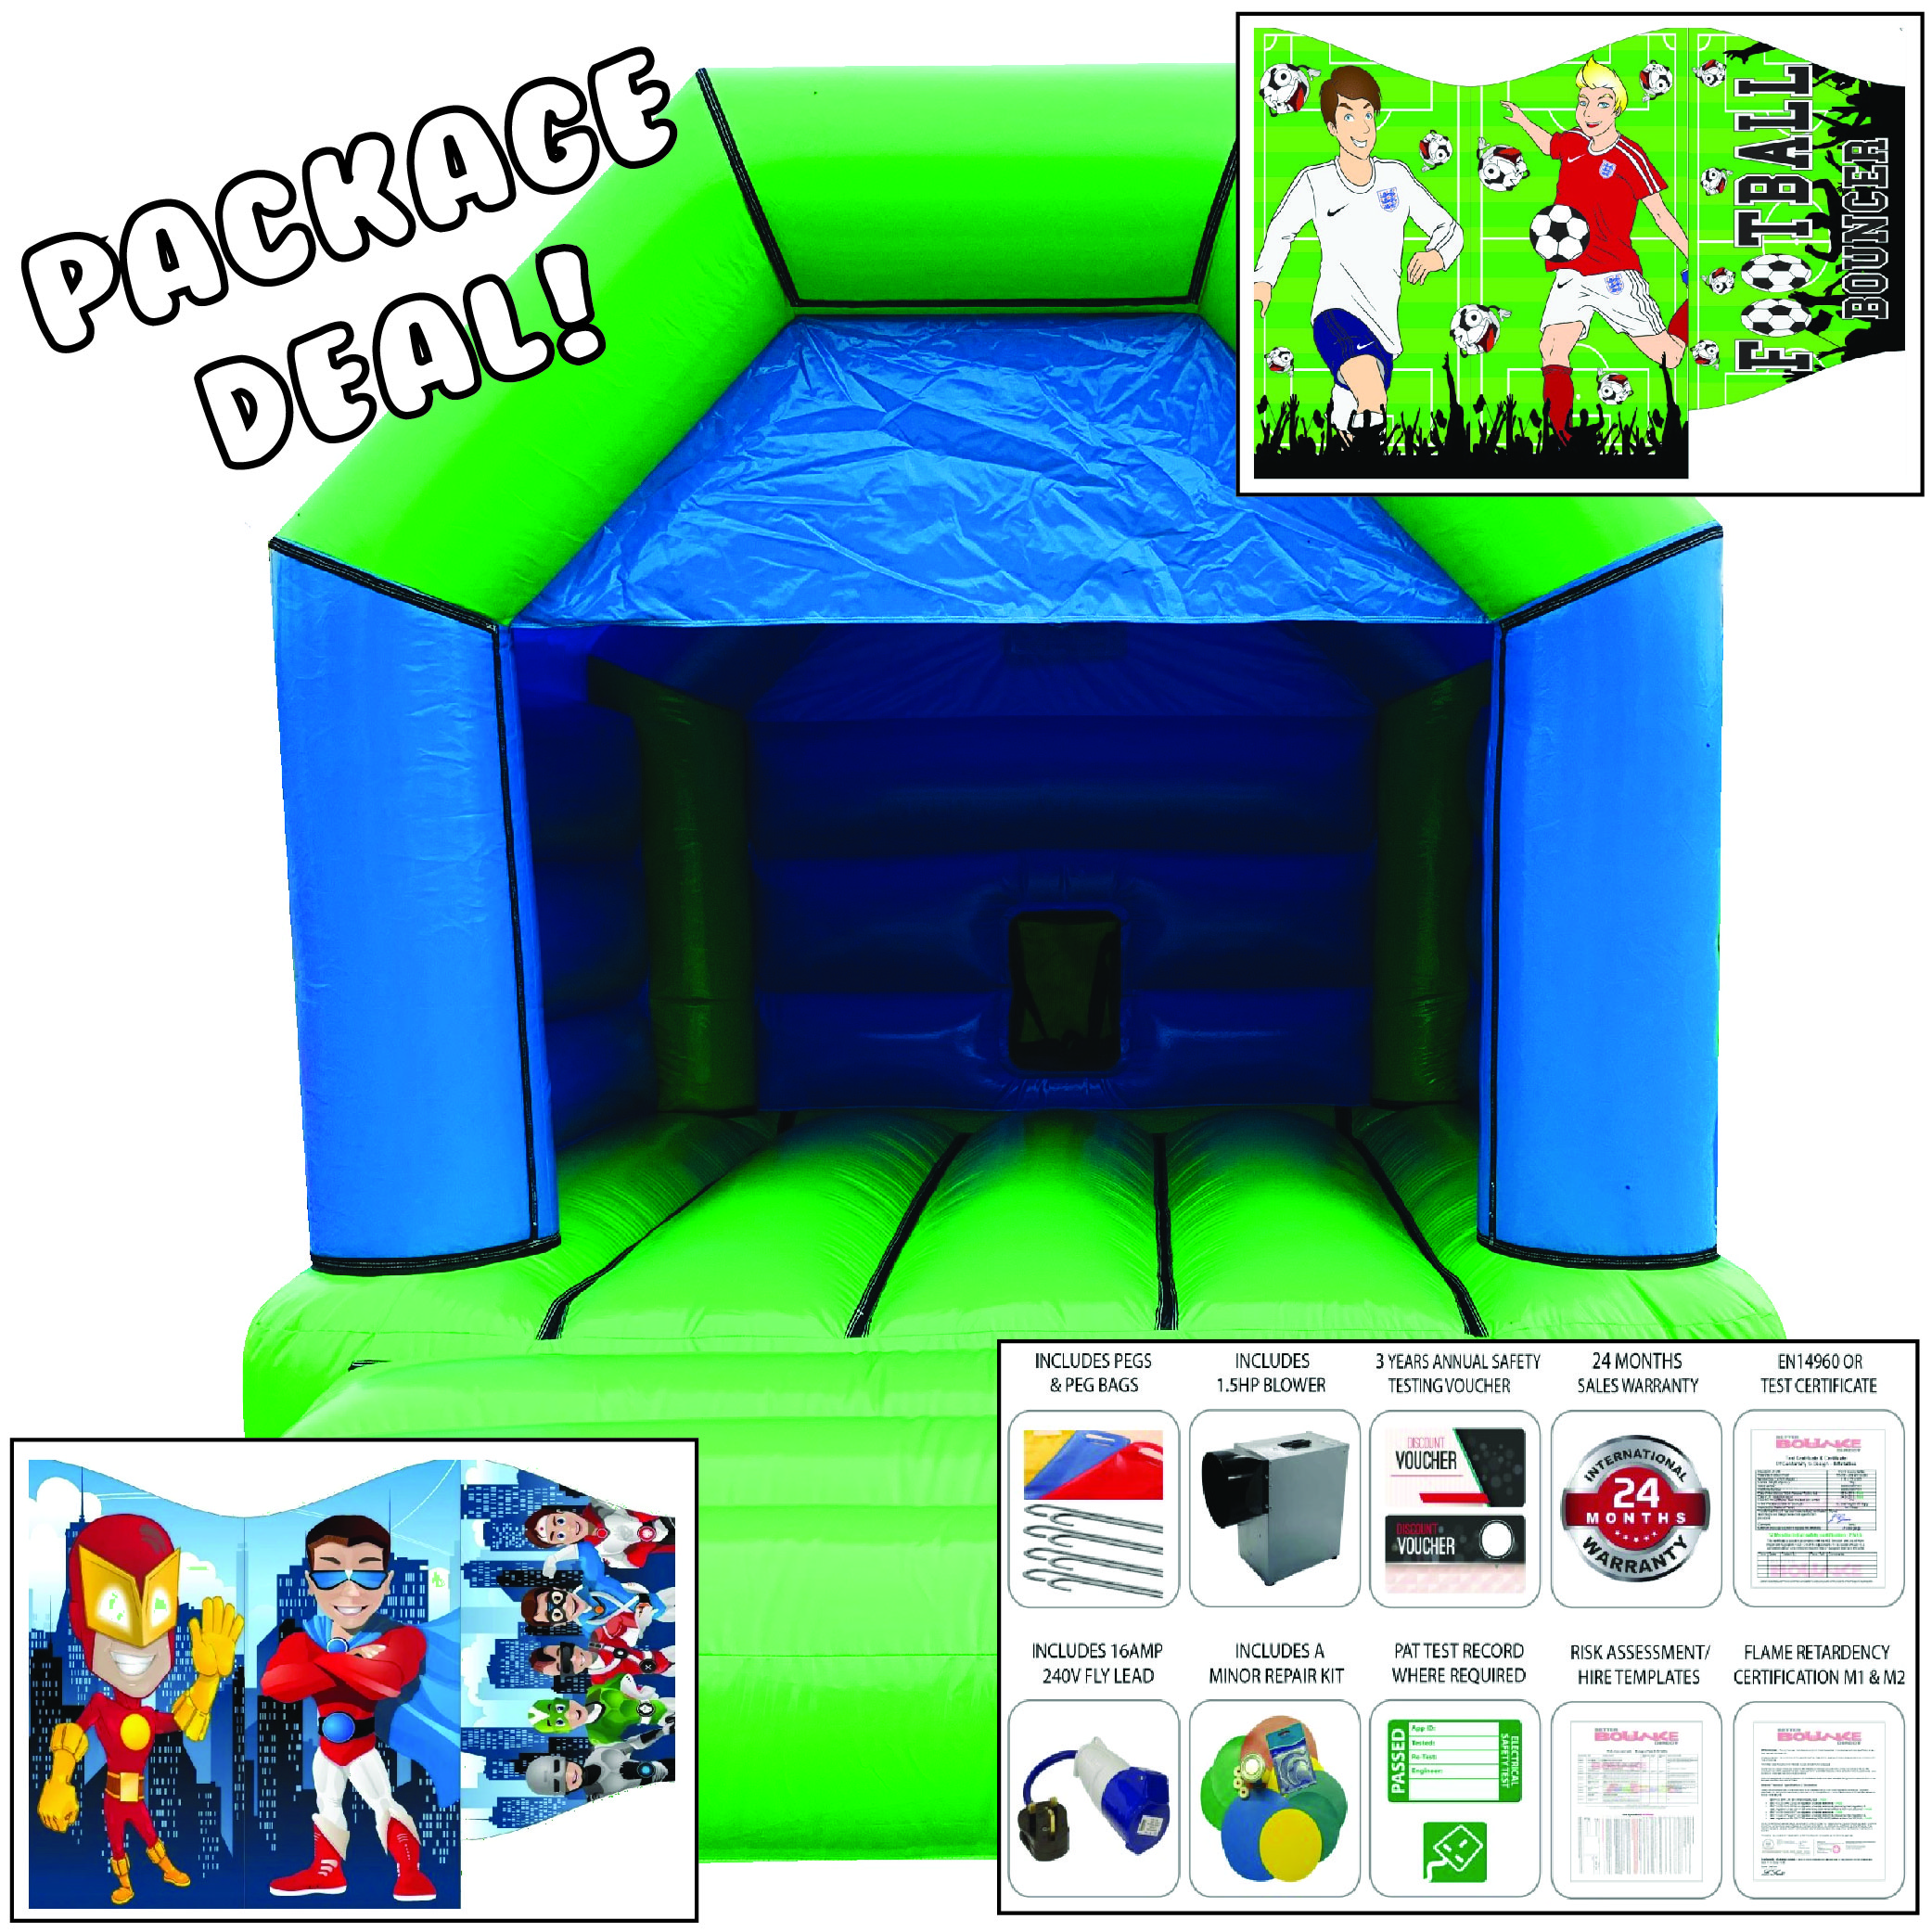 BOUNCY CASTLE SOFTPLAY STARTUP HIRE BUSINESS £50 VOUCHER FOR INFLATABLES 